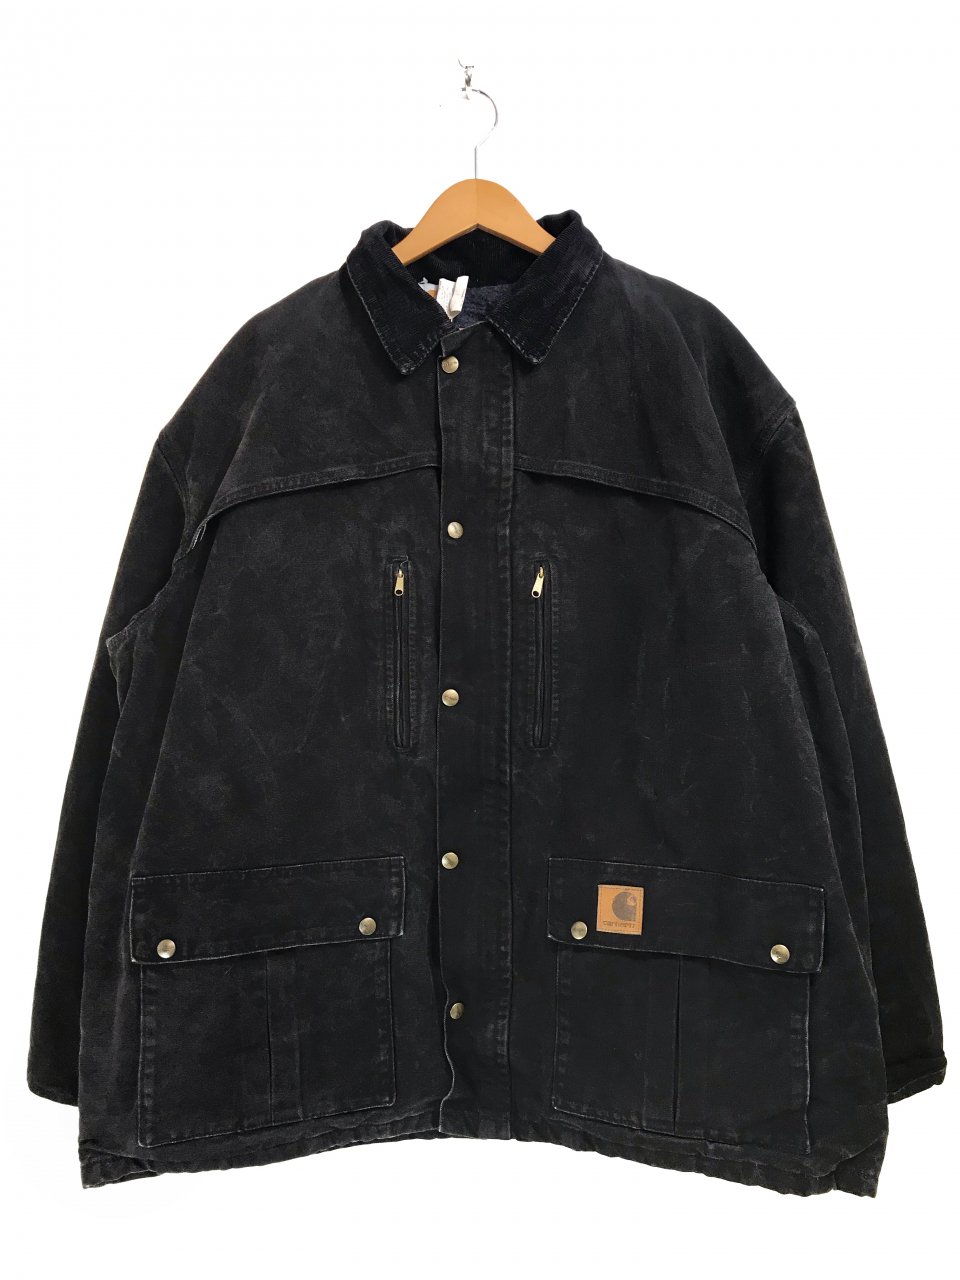 USA製 80s~90s Carhartt Blanket Lined Coverall 黒 XL カーハート 